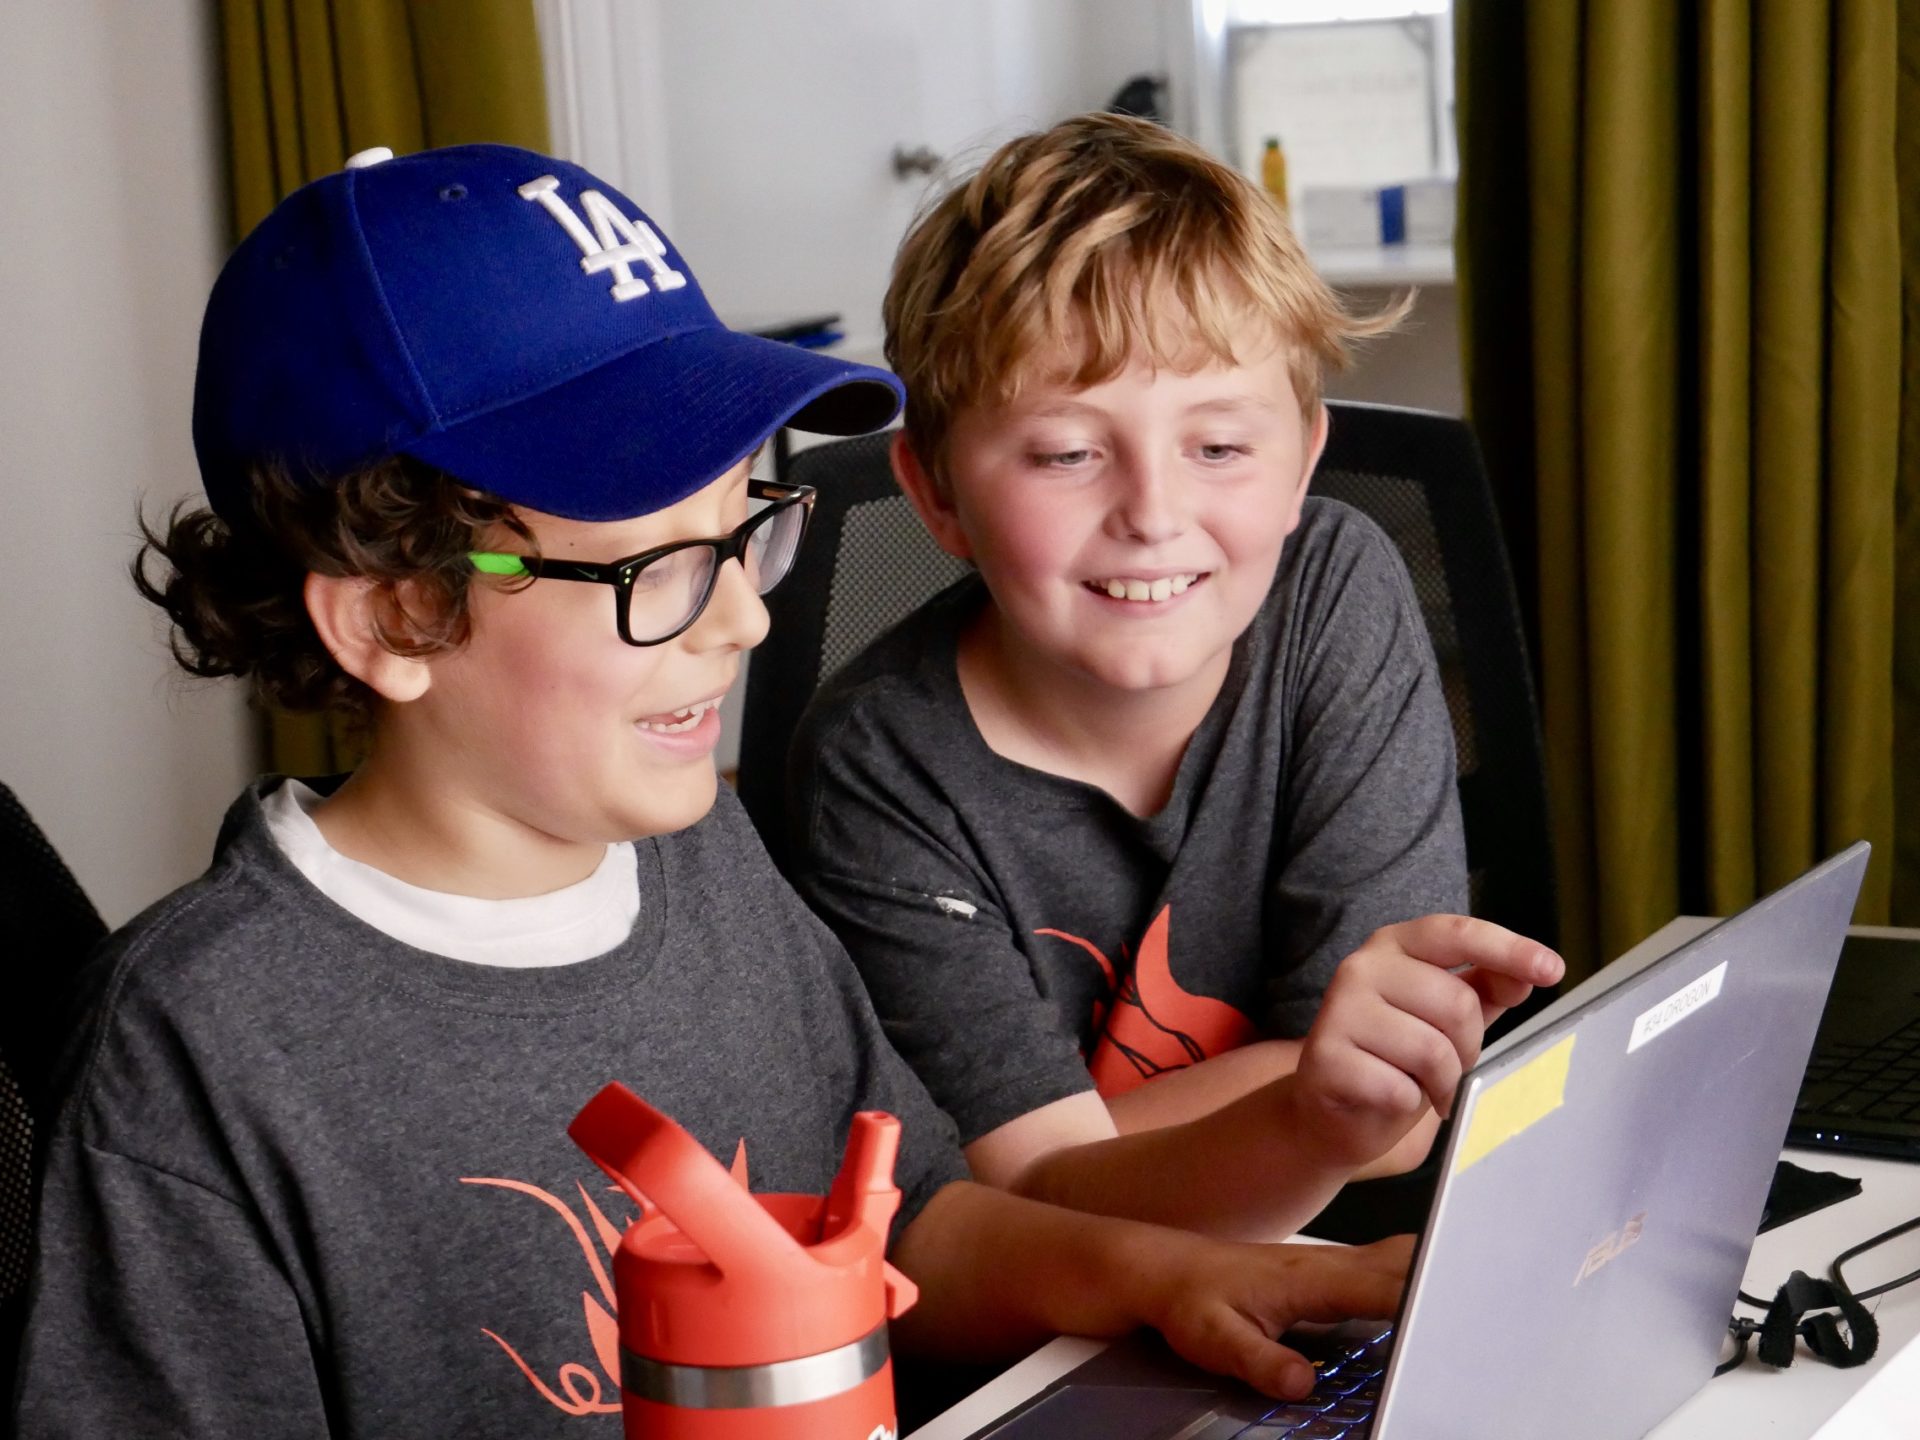 Minecraft camps in-person on school holidays